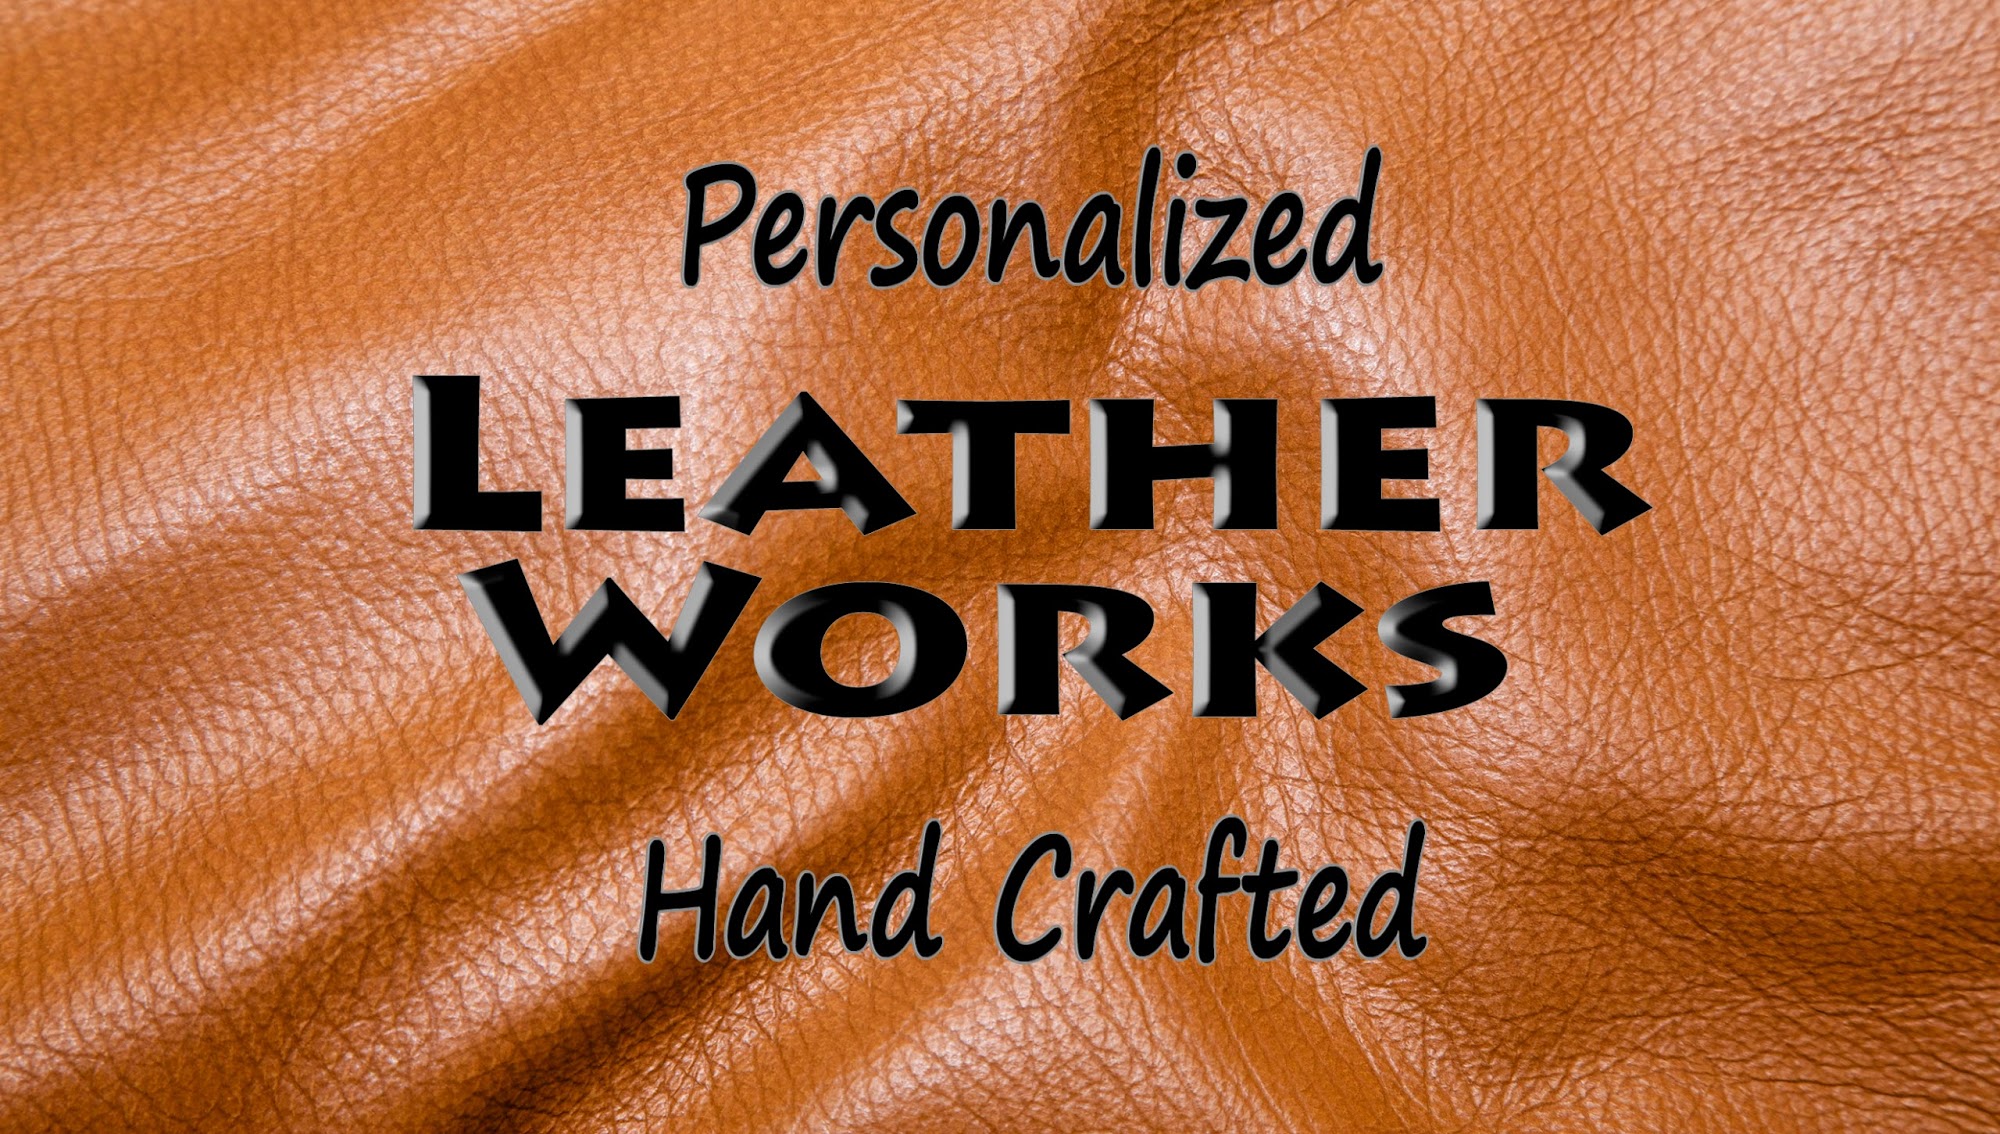 Darrell's Craft - hand crafted LeatherWorks